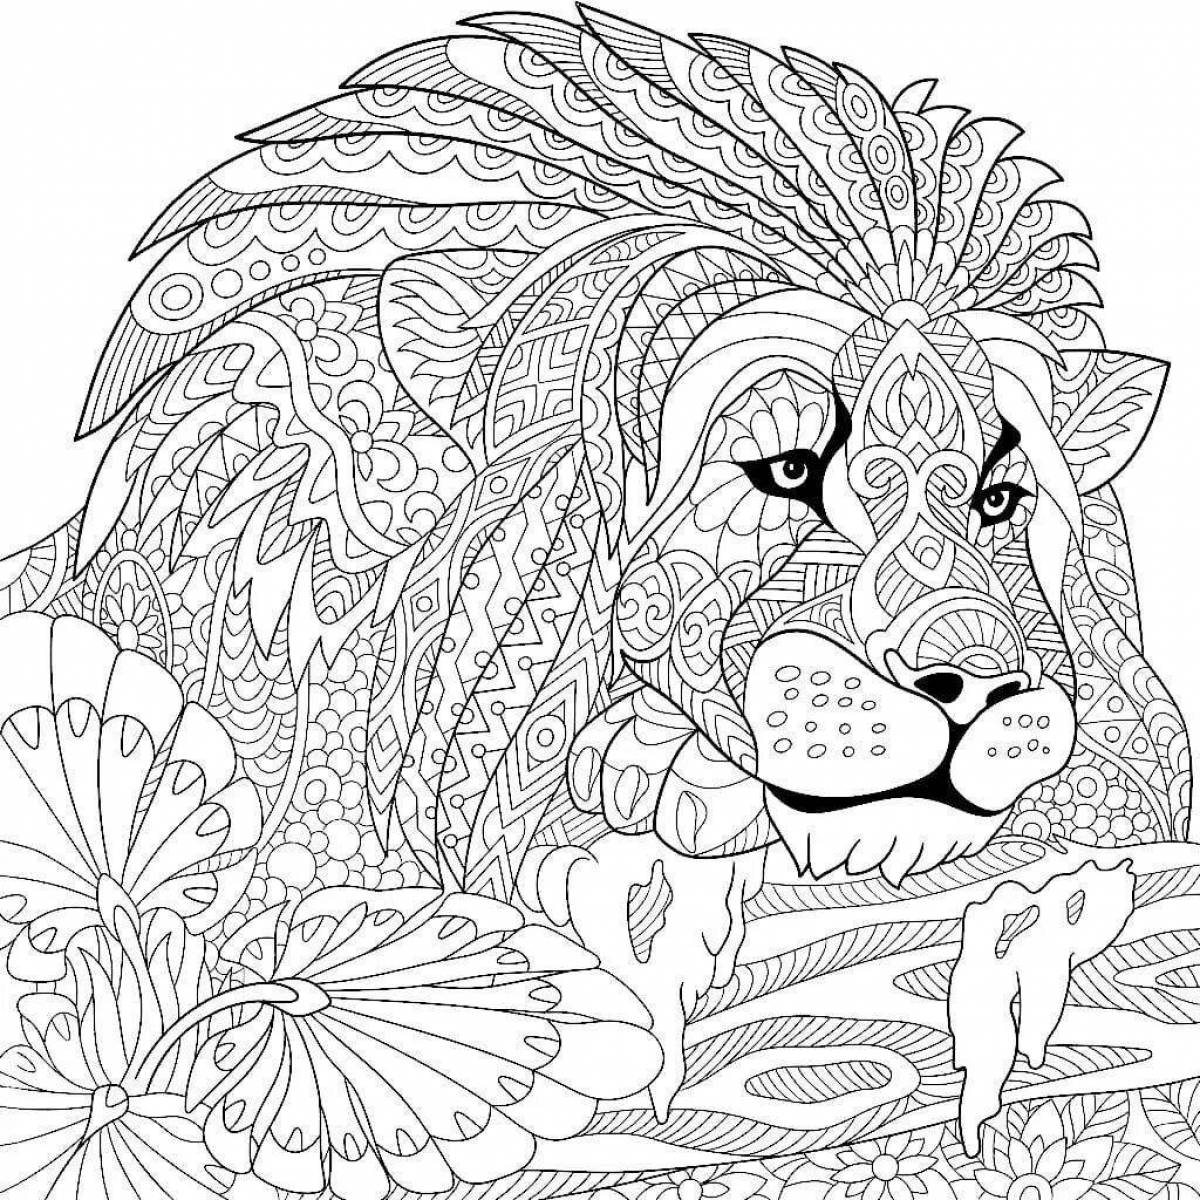 A spectacular coloring book for girls 12 years old complex of animals